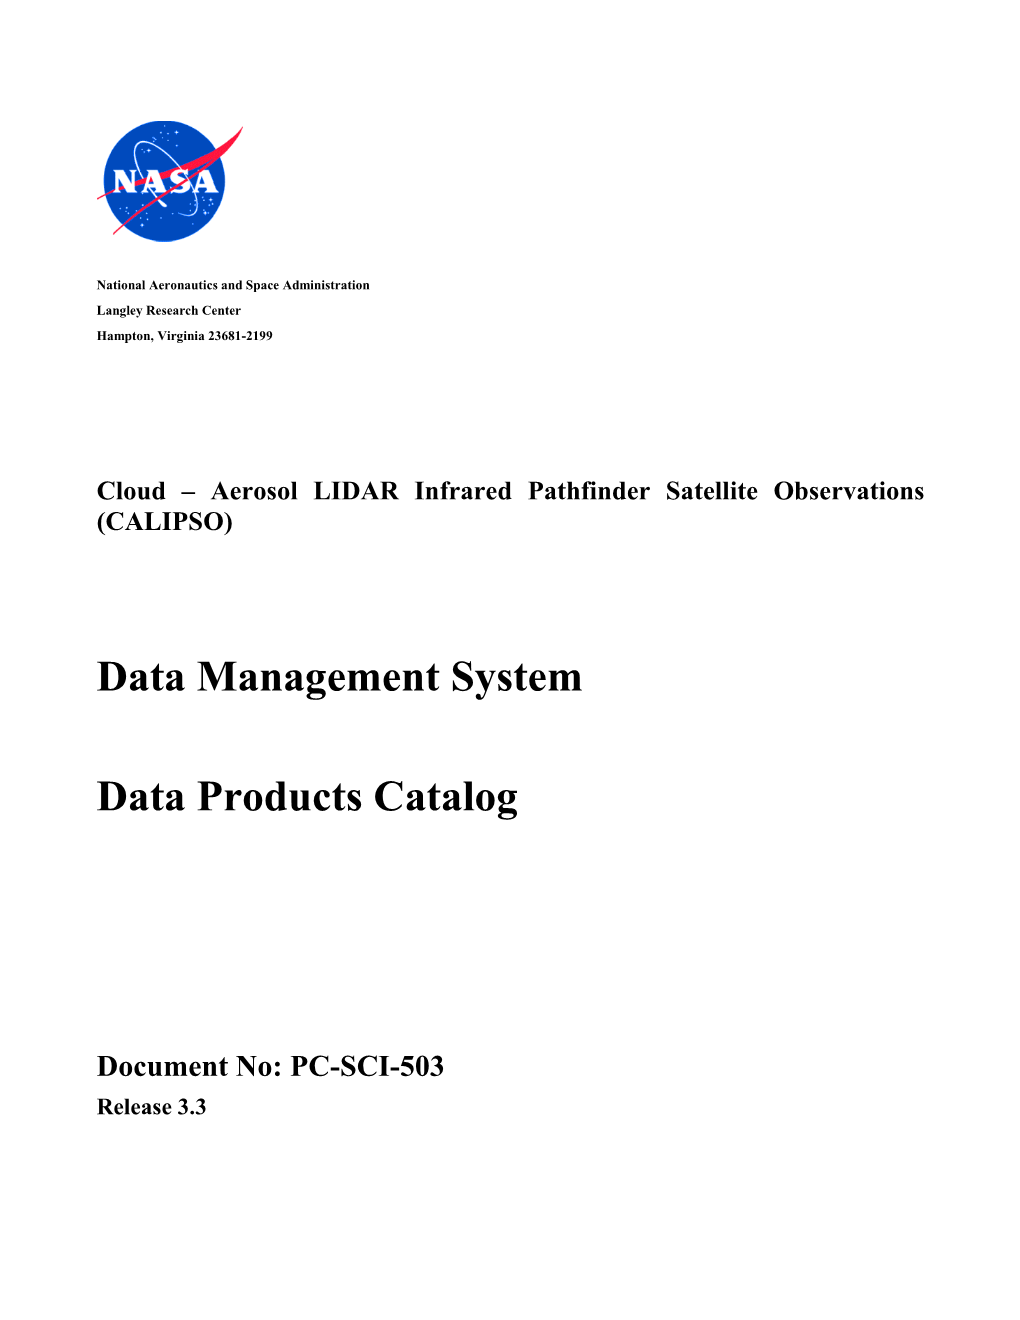 CALIPSO Data Products Catalog (DPC) Is Intended to Provide an Overview of the Data Products That Are Used Or Produced by the Data Management System